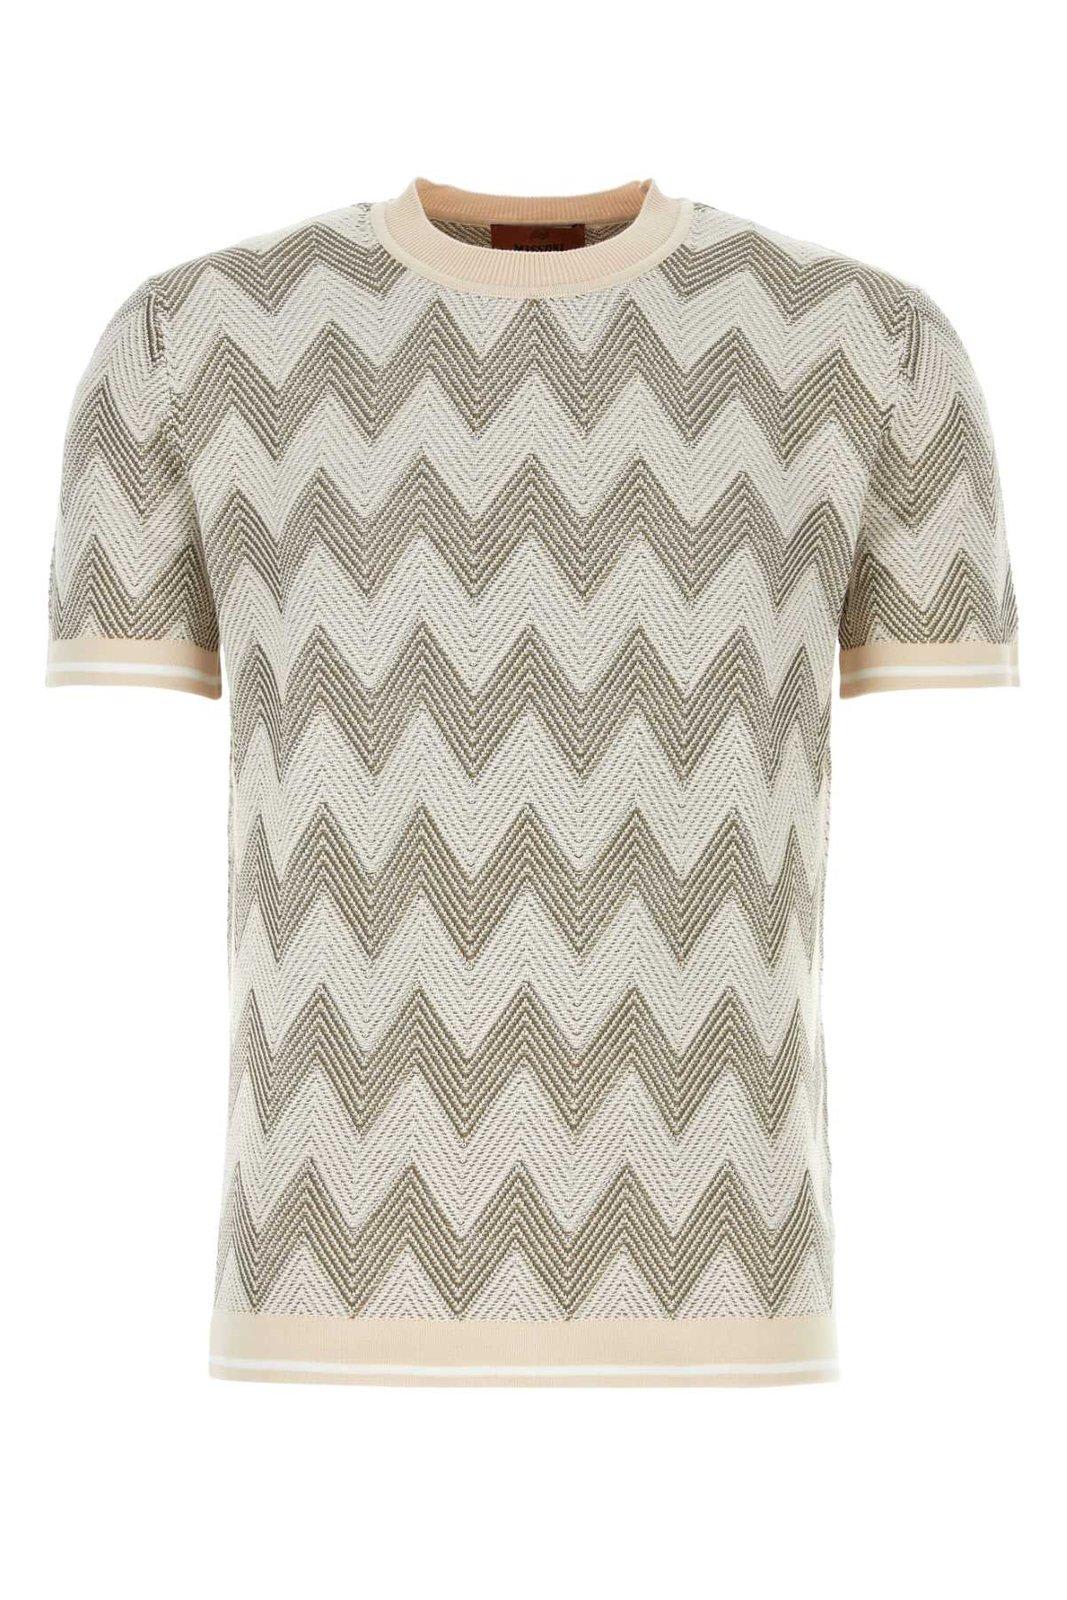 Missoni Zig-zag Patterned Knitted T-shirt